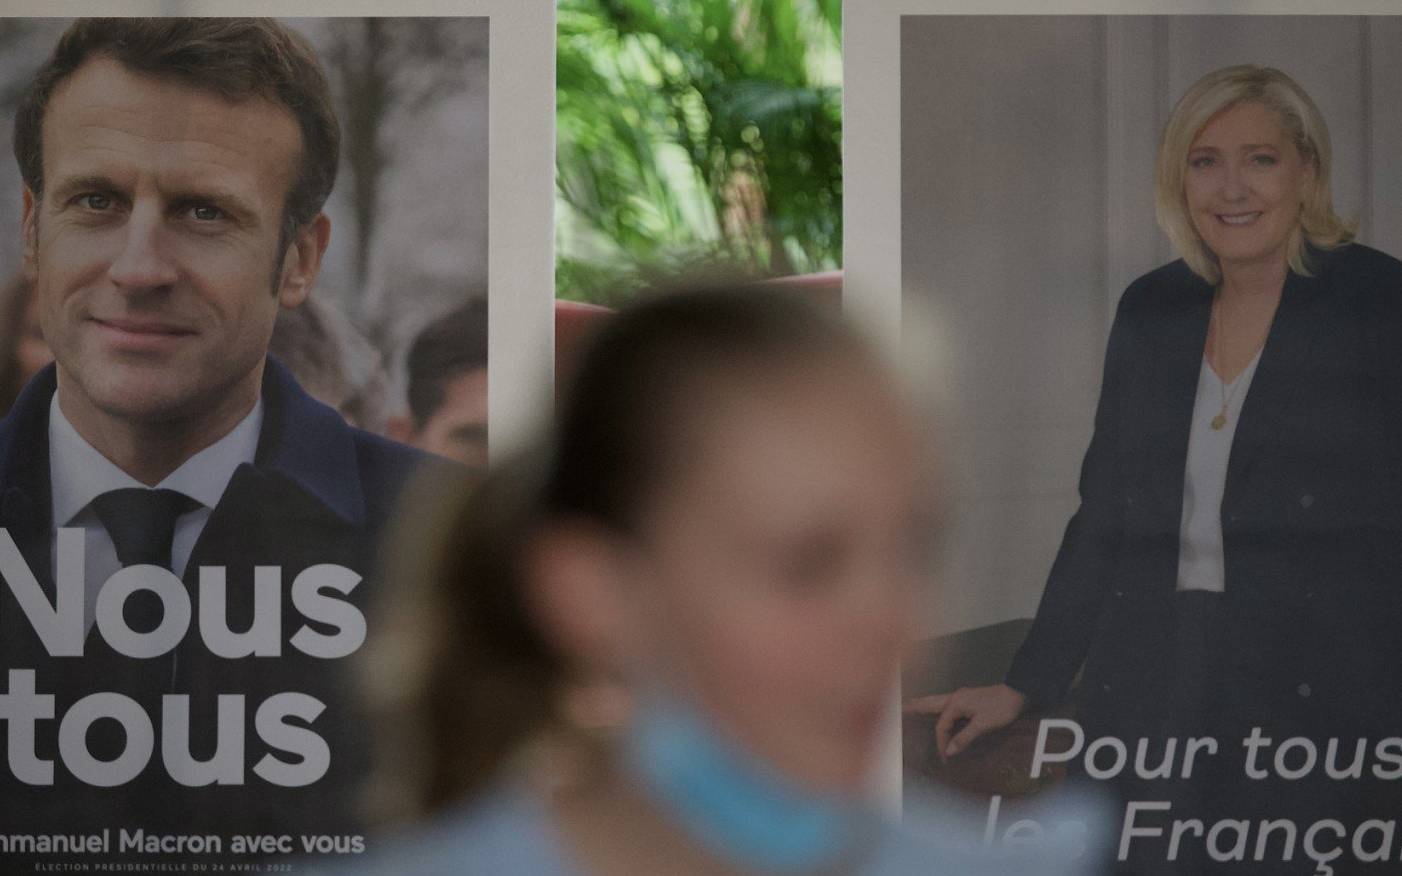 Pictures of candidates Emmanuel Macron (L) and Marine Le Pen are displayed during the second round of voting in the French presidential elections at the French Embassy in Beijing on April 24, 2022. (Photo by Noel Celis / AFP)